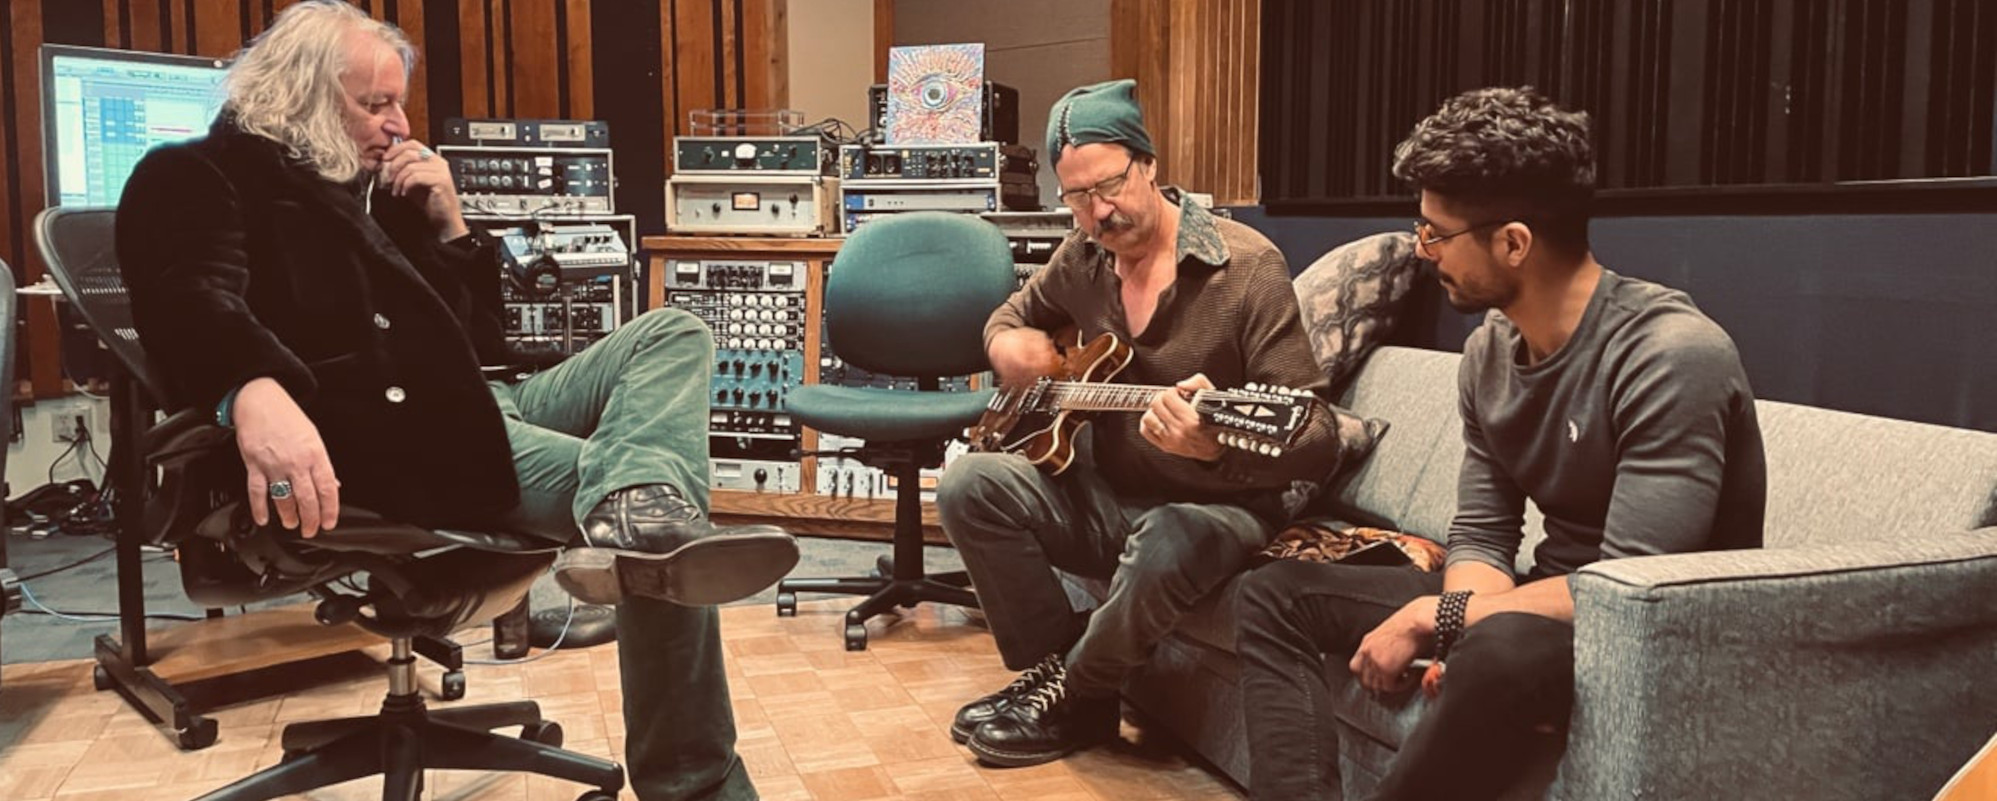 Members of Nirvana and R.E.M. Join Cuban Artist Hector Tellez Jr. for New LP